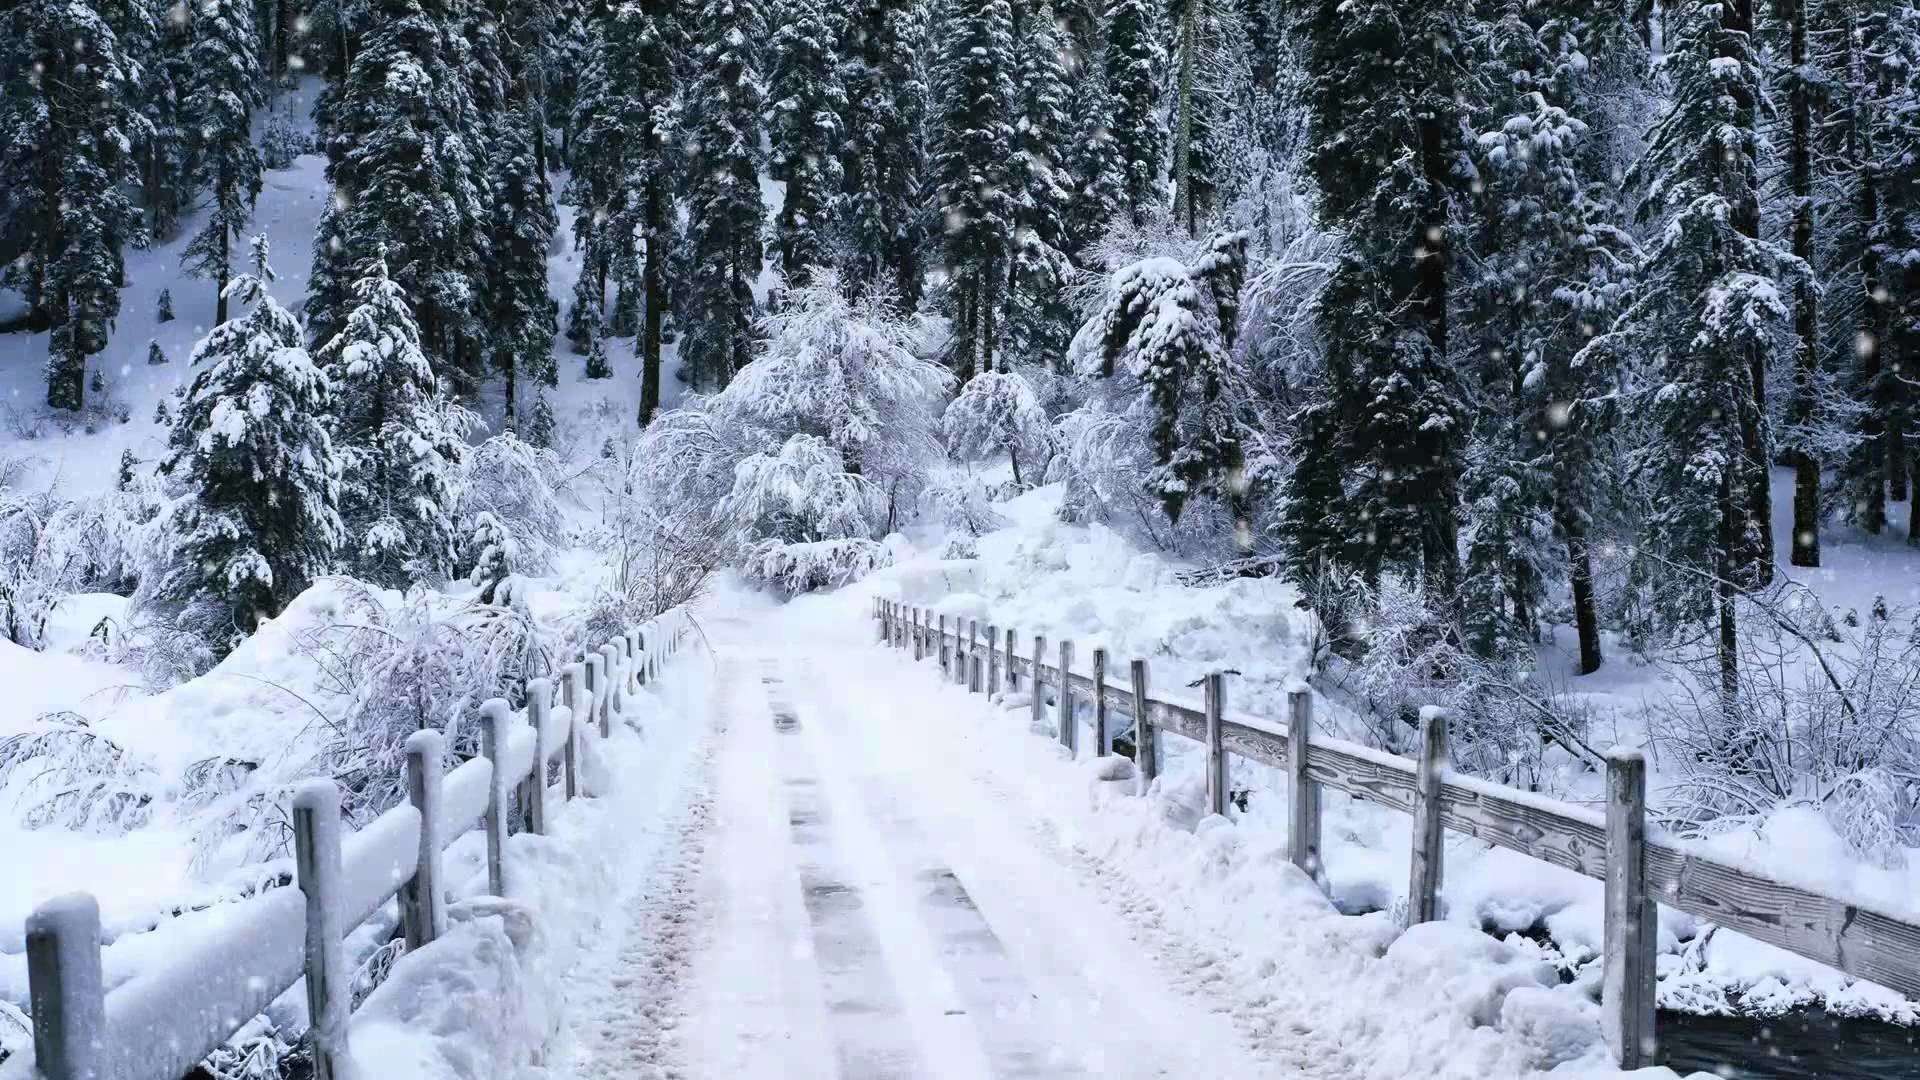 1920x1080 Snow Falling, Windows 7 Video Background, DreamScene (Adobe after effects)  - YouTube